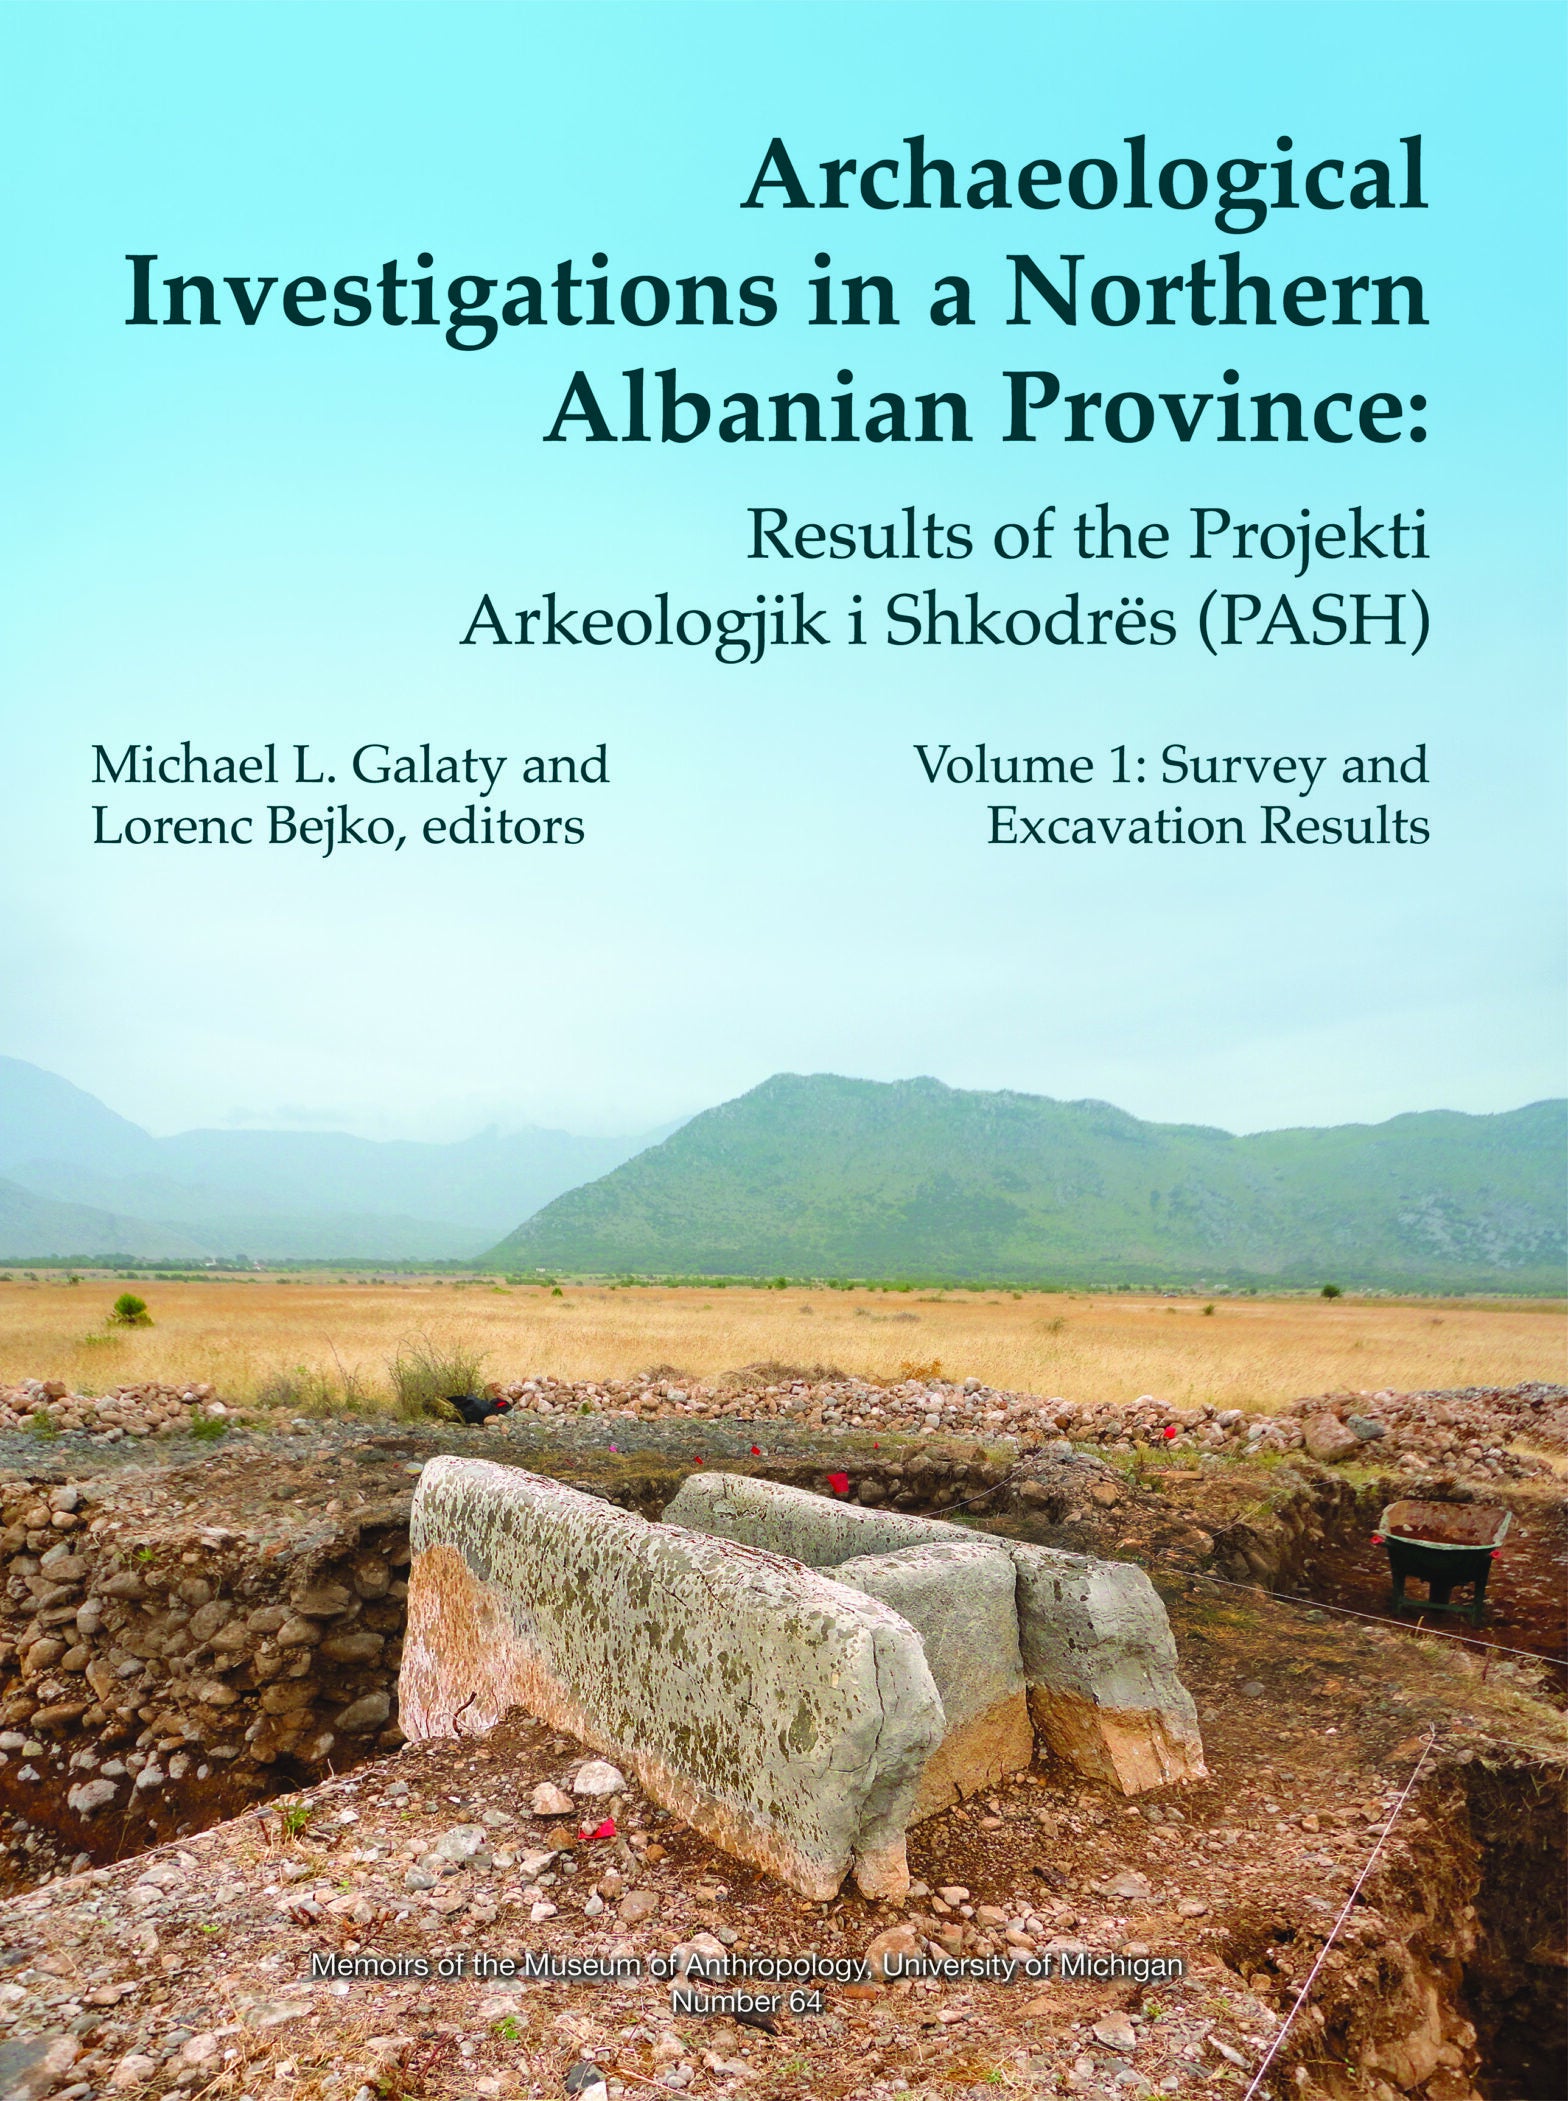 Archaeological Investigations in a Northern Albanian Province: Results of the Projekti Arkeologjik i Shkodrës (PASH), Volumes 1 and 2